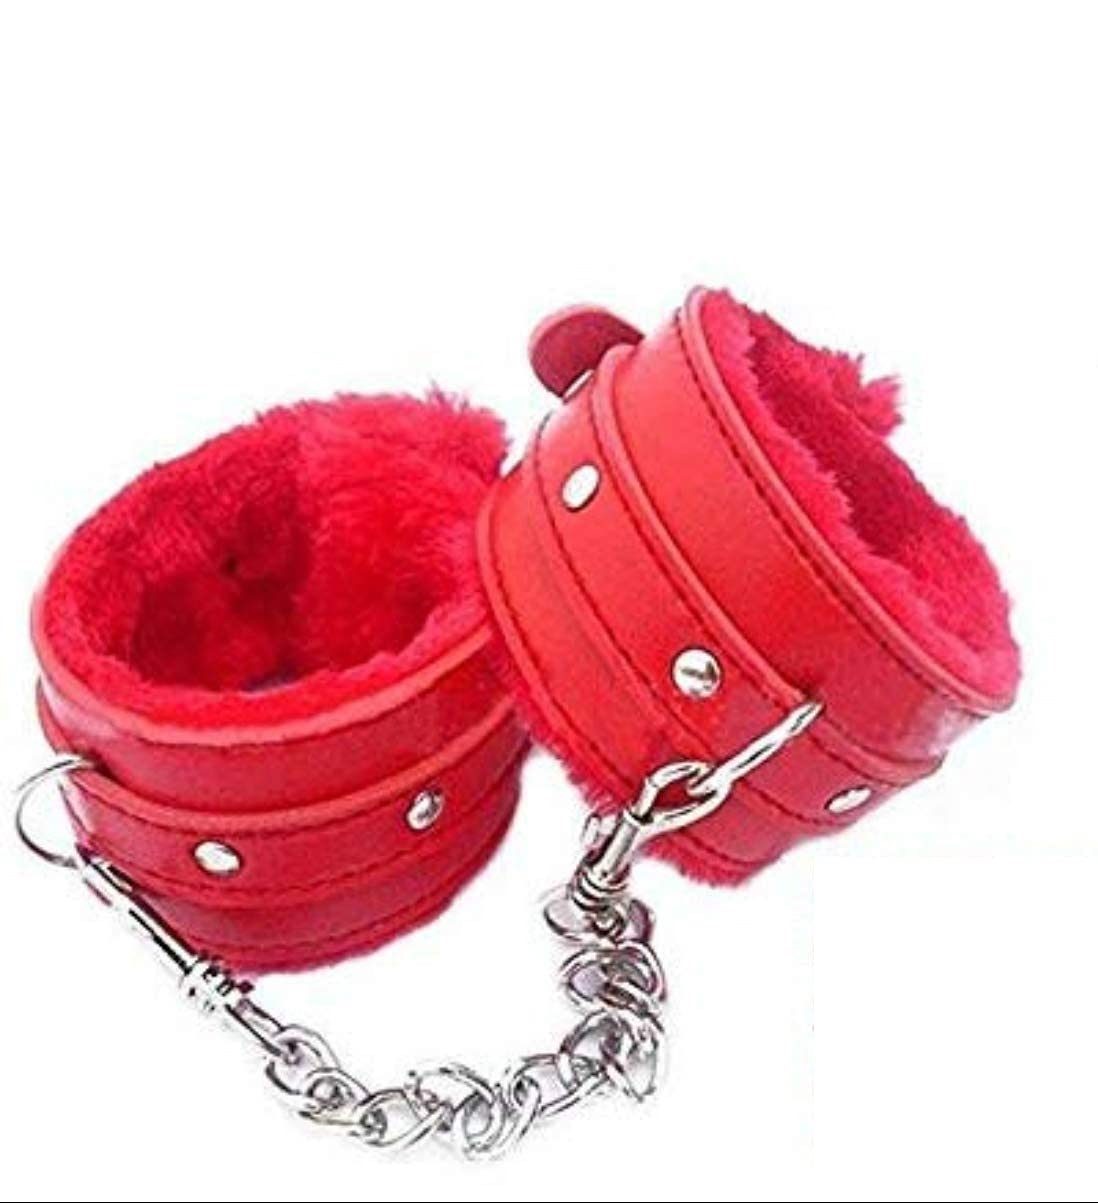 Premium Red Handcuffs – Faux Leather